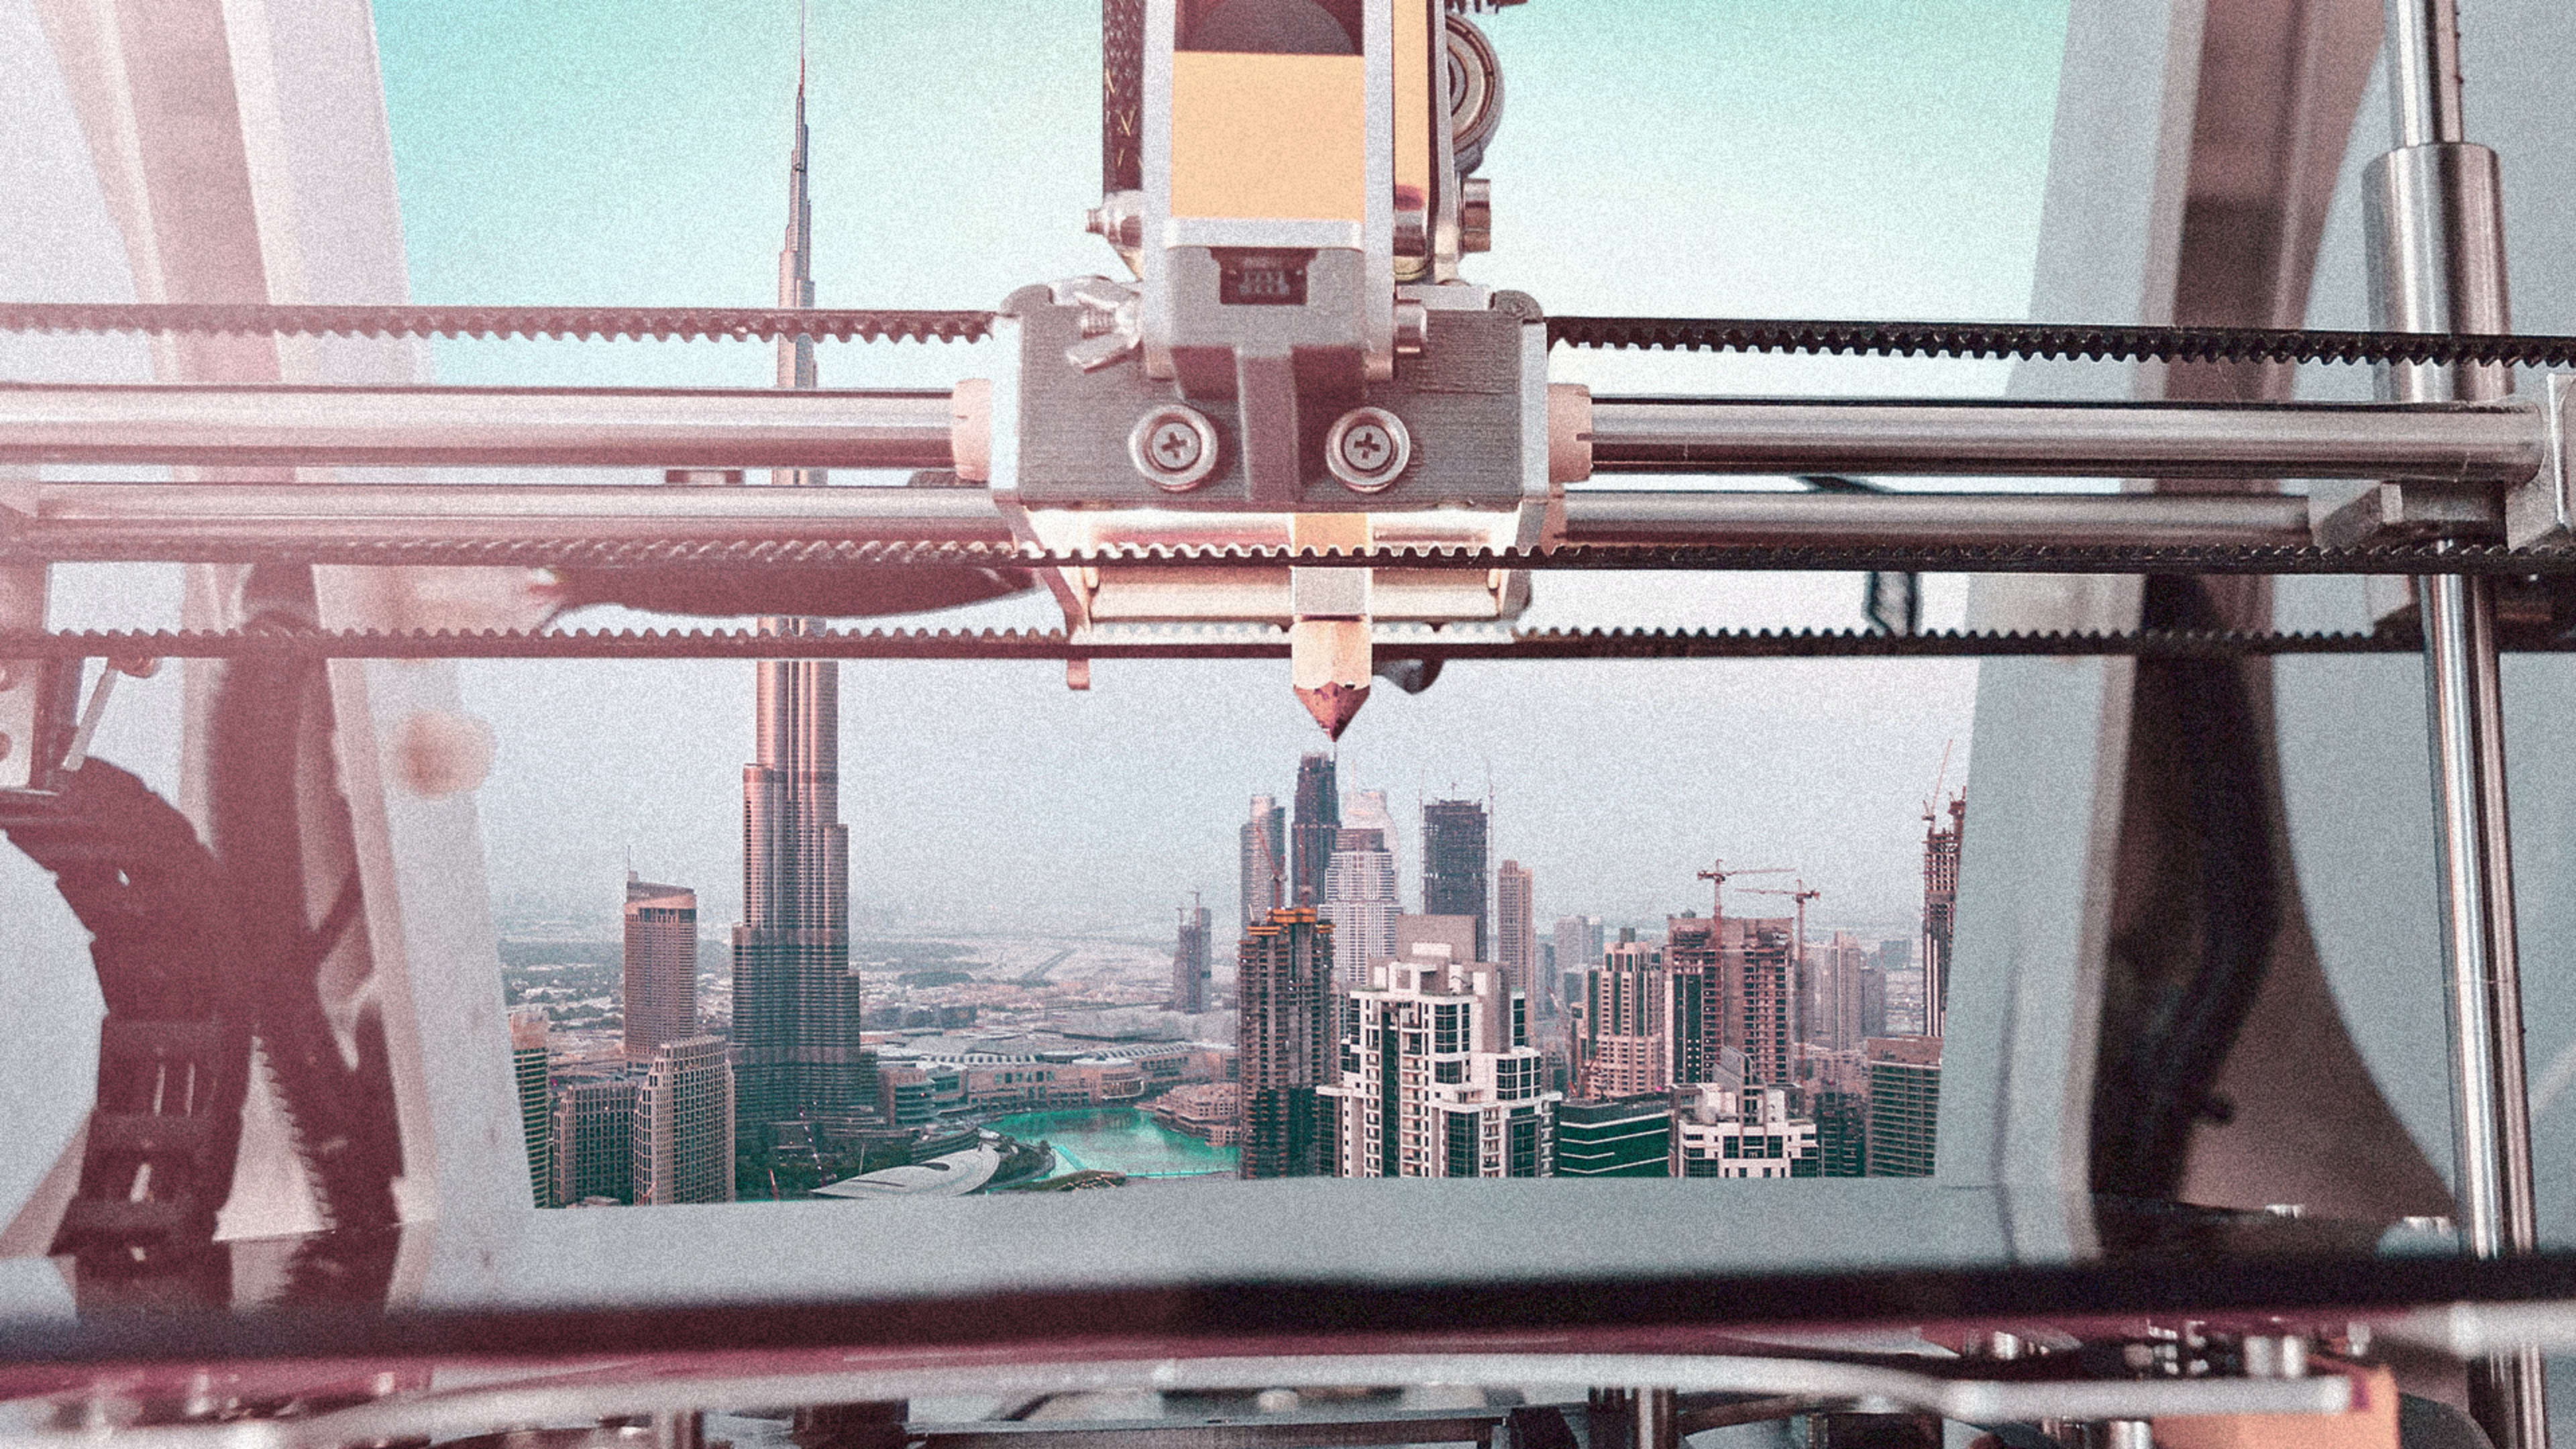 Dubai mandates that all new buildings be 25% 3D printed by 2025